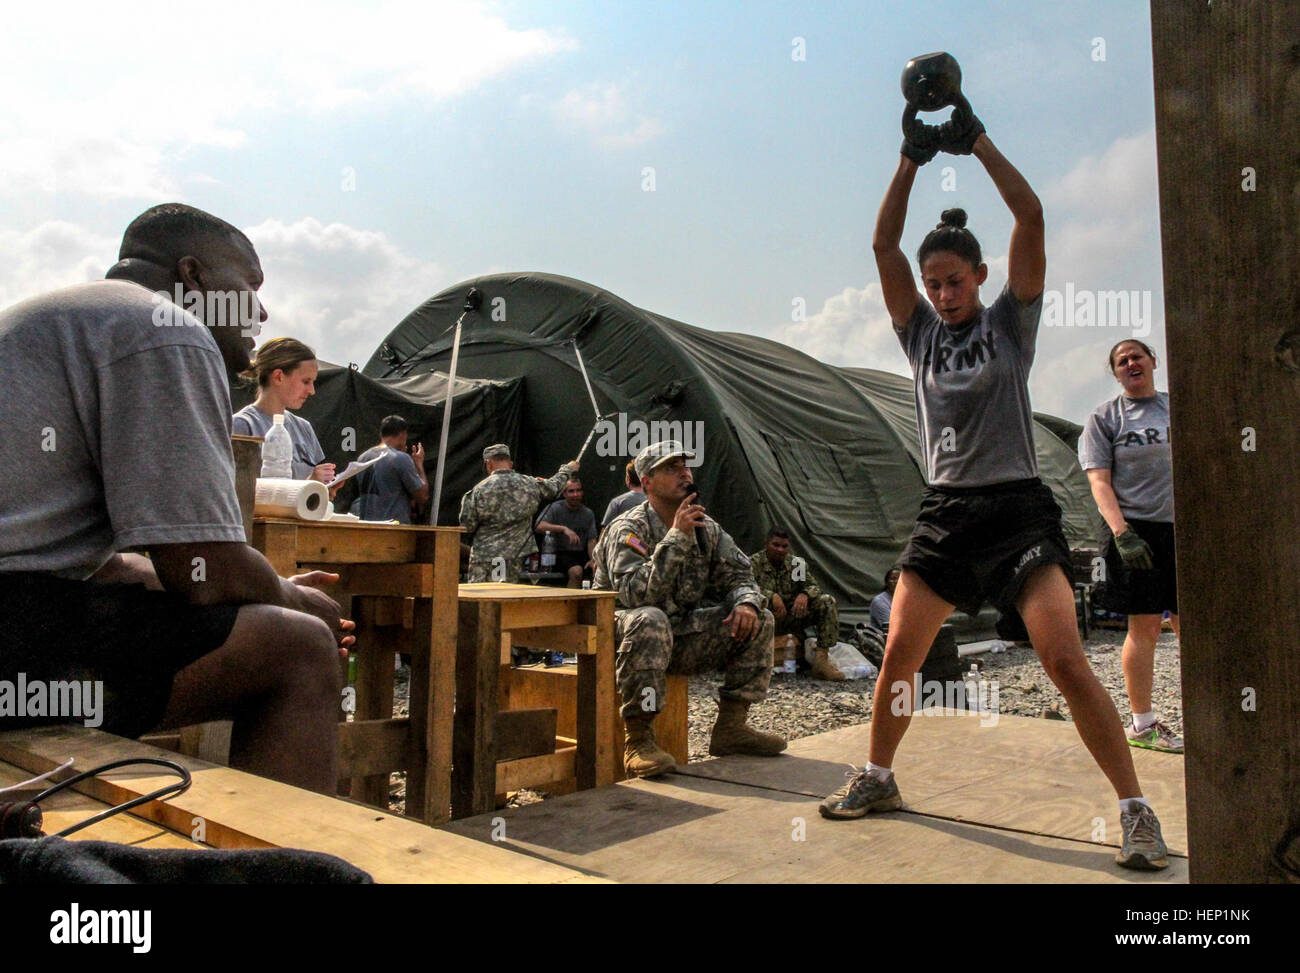 First Lt. Kayla Hodges, 194th Military Police Company, 716th Military Police Battalion, out of Fort Campbell, Ky., performs kettle bell swings during a functional fitness competition in honor of the holidays and Army spirit, held at Roberts International Airport, Monrovia, Liberia, Dec. 24, 2014. The functional fitness challenge included a series of physical exercises, which competitors from various units needed to complete in less than 20 minutes. Some of those exercises included, lateral bar burpees, deadlifts of 225 pounds for male competitors and 135 pounds for females, a 200 meter run, an Stock Photo